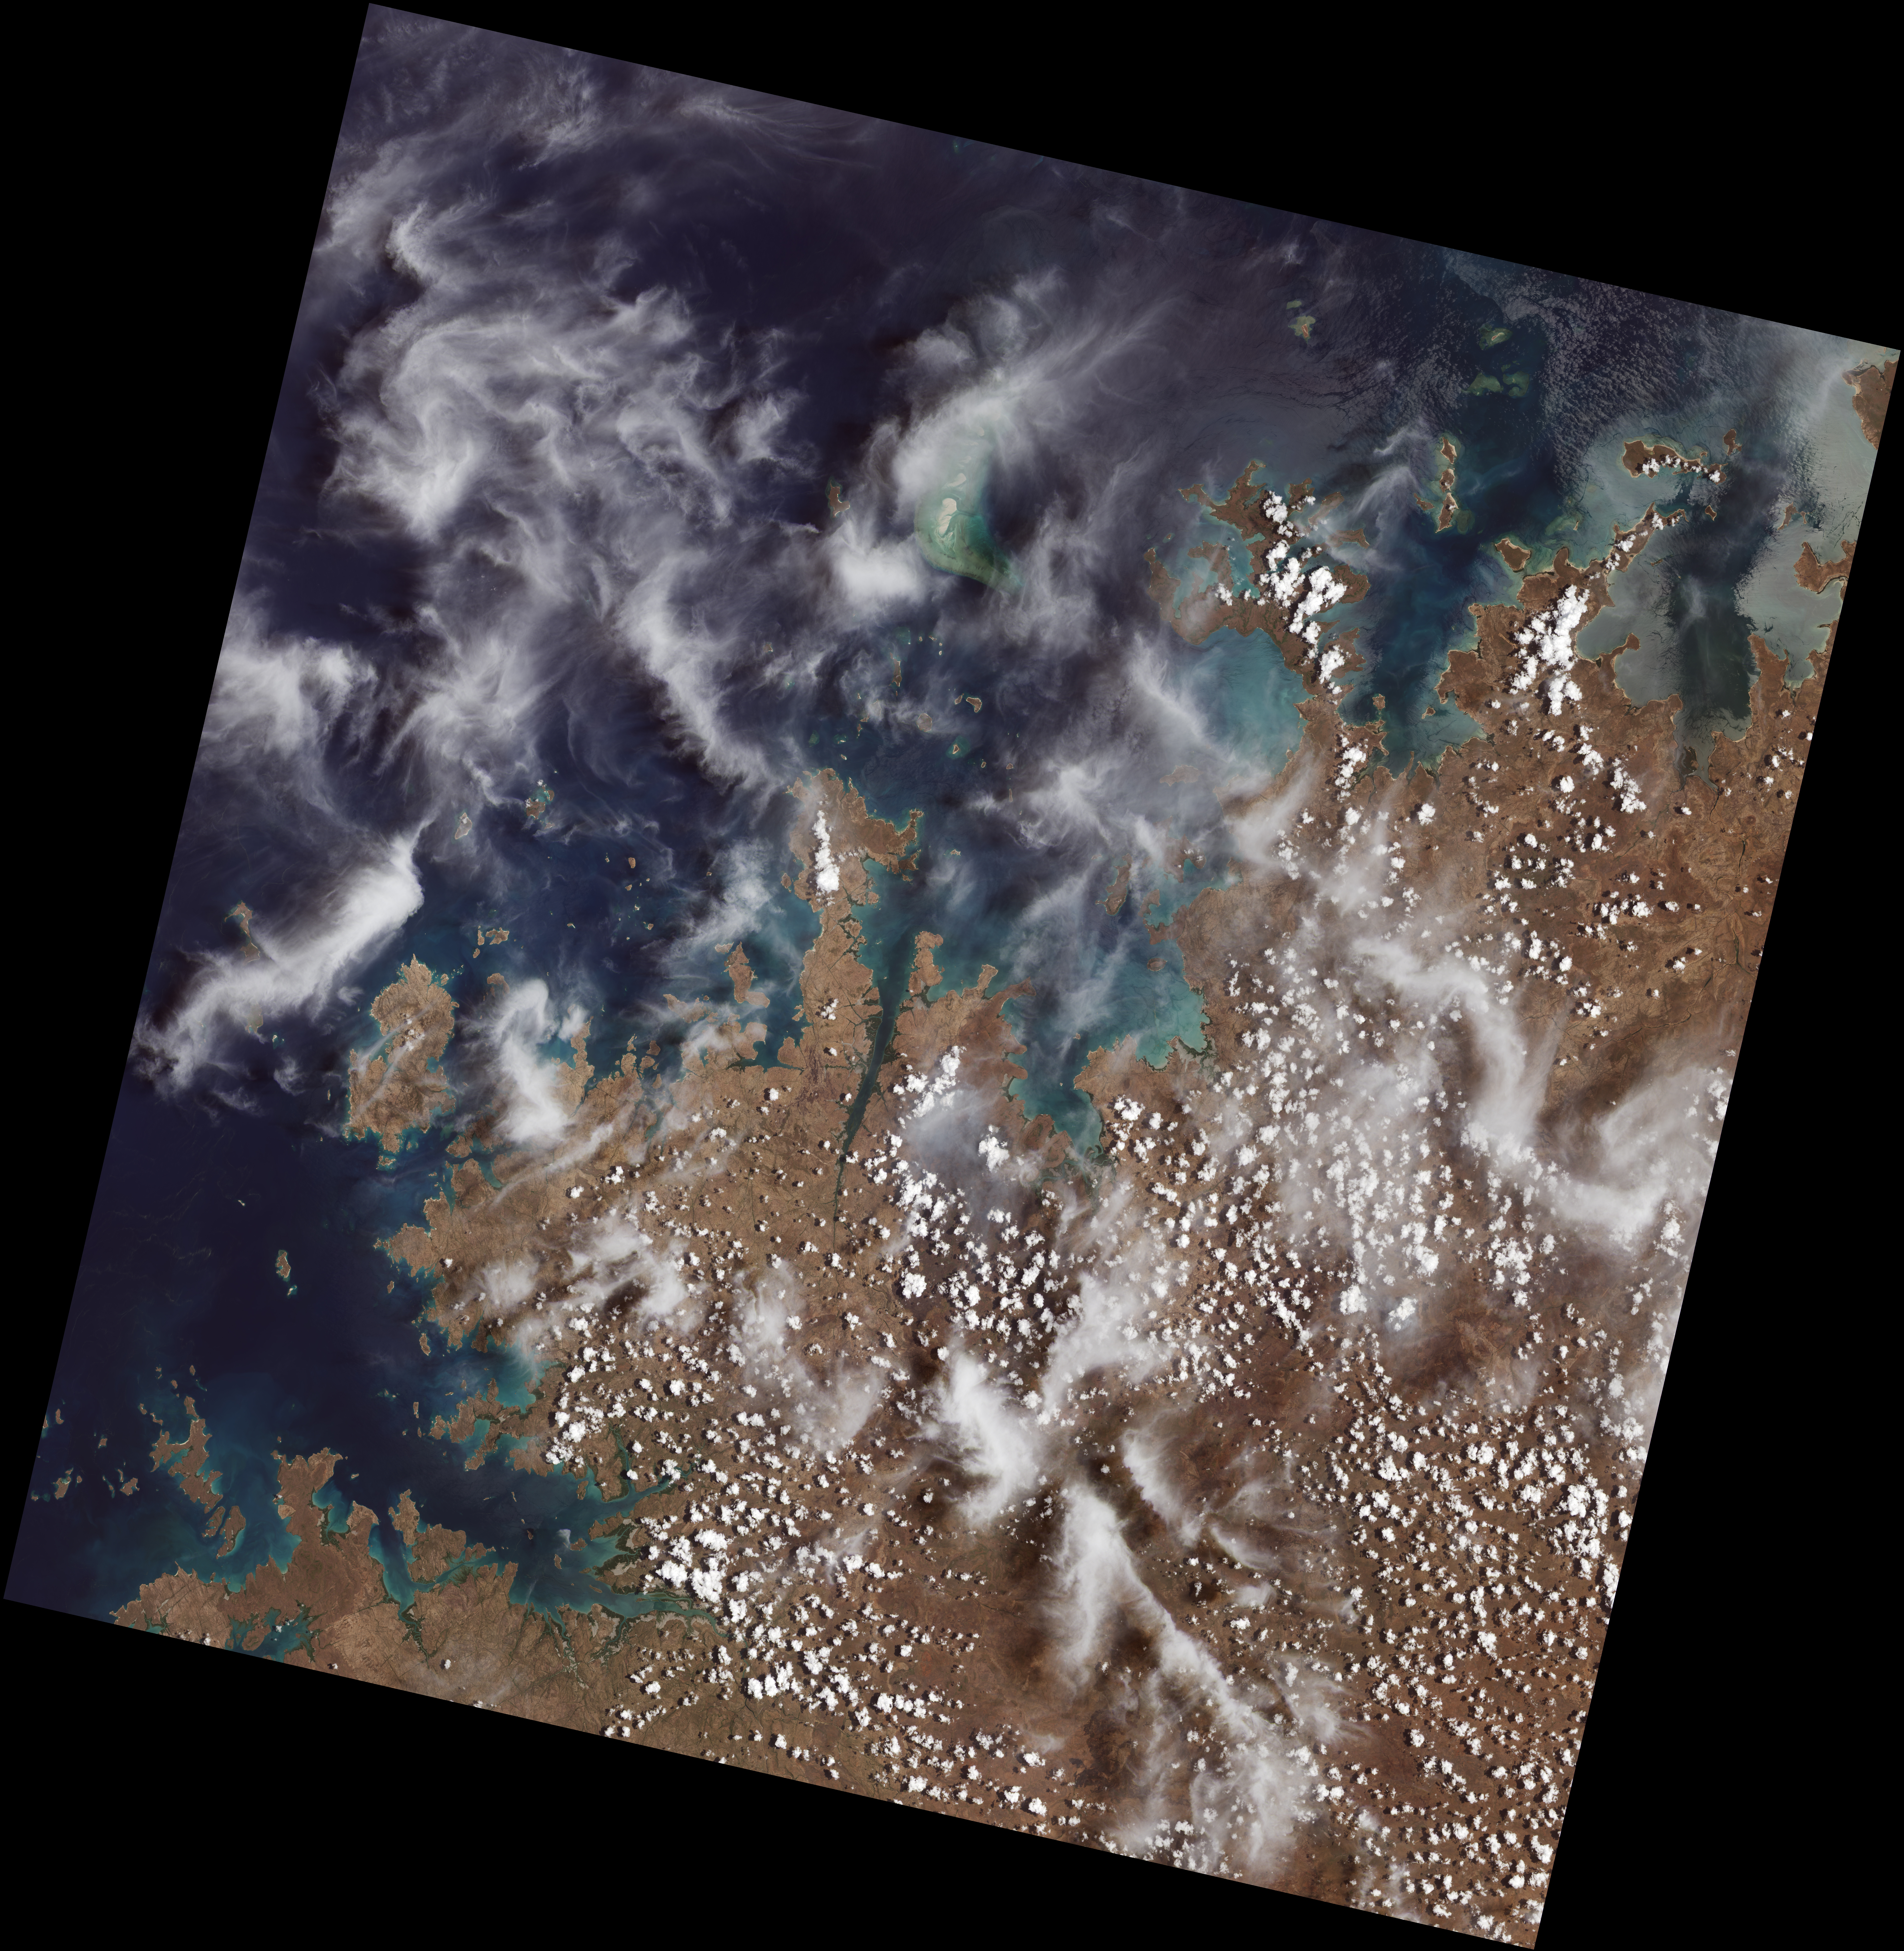 The first data from Landsat 9, of Australia's Kimberley Coast in Western Australia, shows off the capabilities of the two instruments on the spacecraft. This image, from the Operational Land Imager 2, or OLI-2, was acquired on Oct. 31, 2021. Although similar in design to its predecessor Landsat 8, the improvements to Landsat 9 allow it to detect more subtle differences, especially over darker areas like water or the dense mangrove forests along the coast.